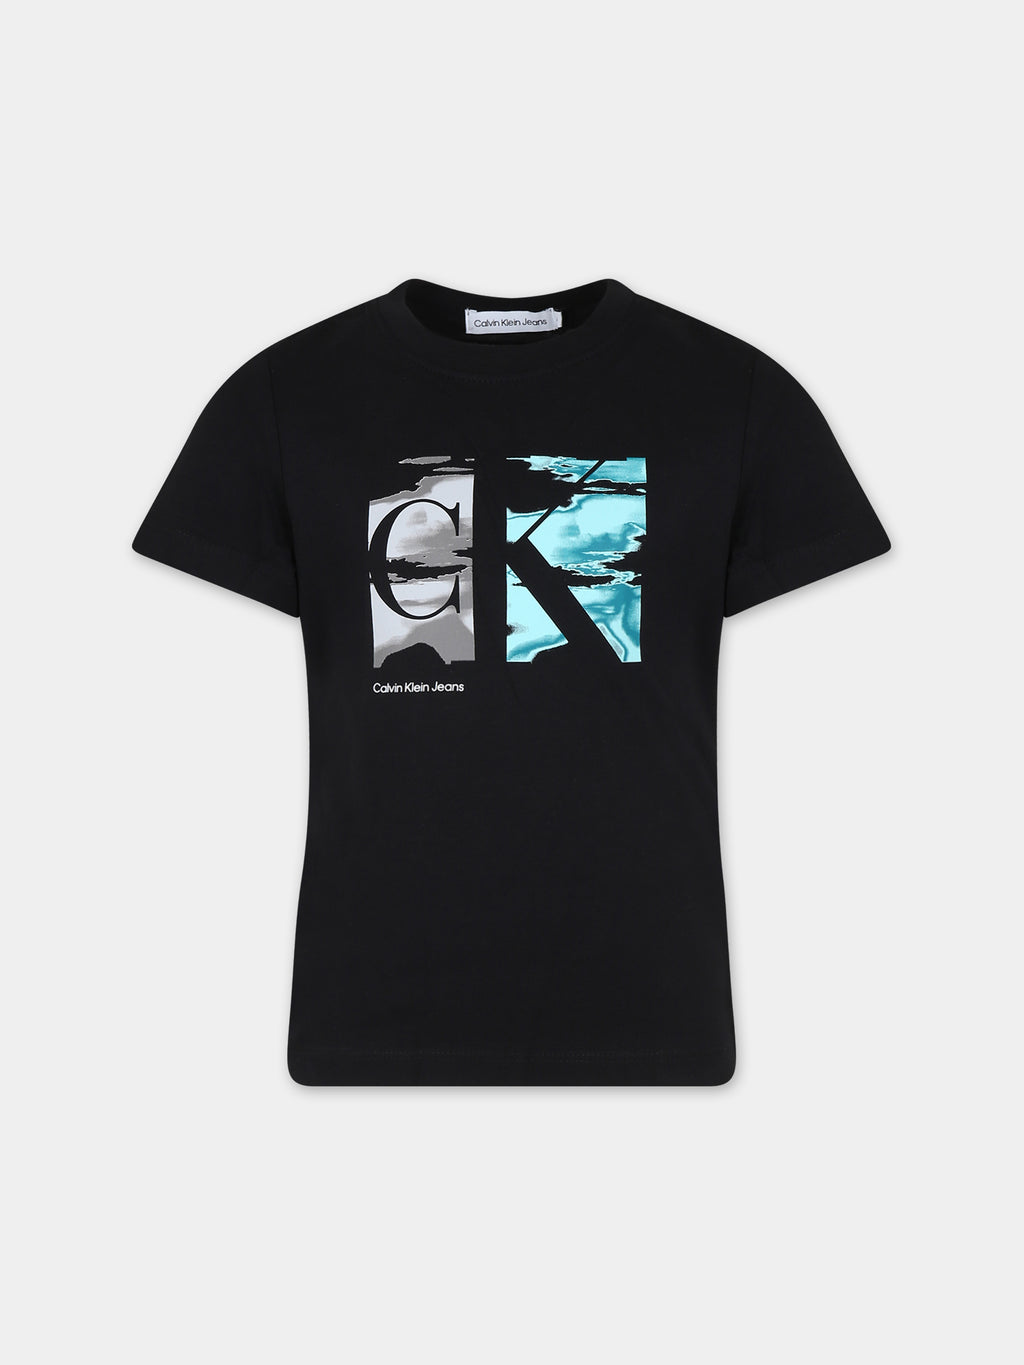 Black t-shirt for kids with logo and print